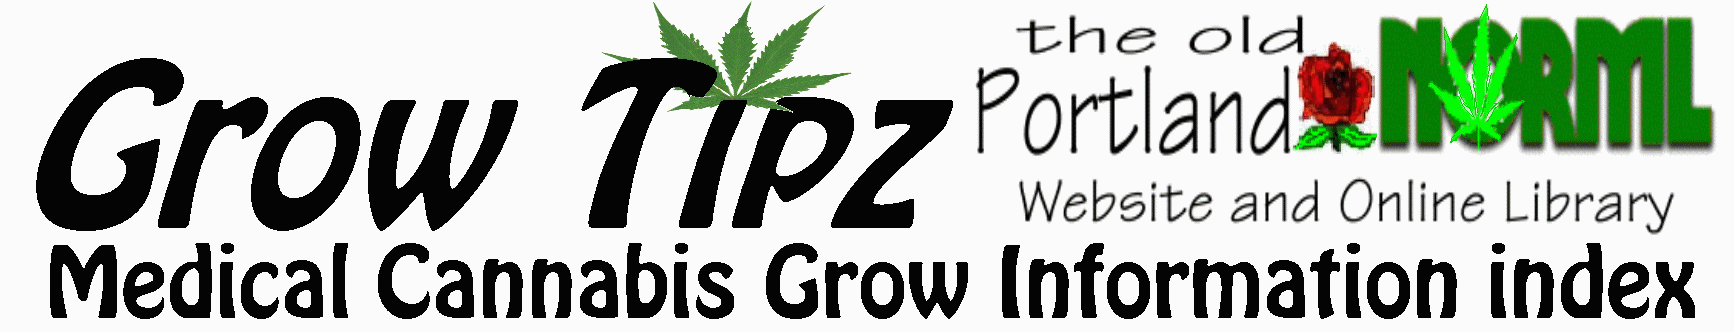 welcome to Grow Tipz, your Medical Cannabis Grow Information index